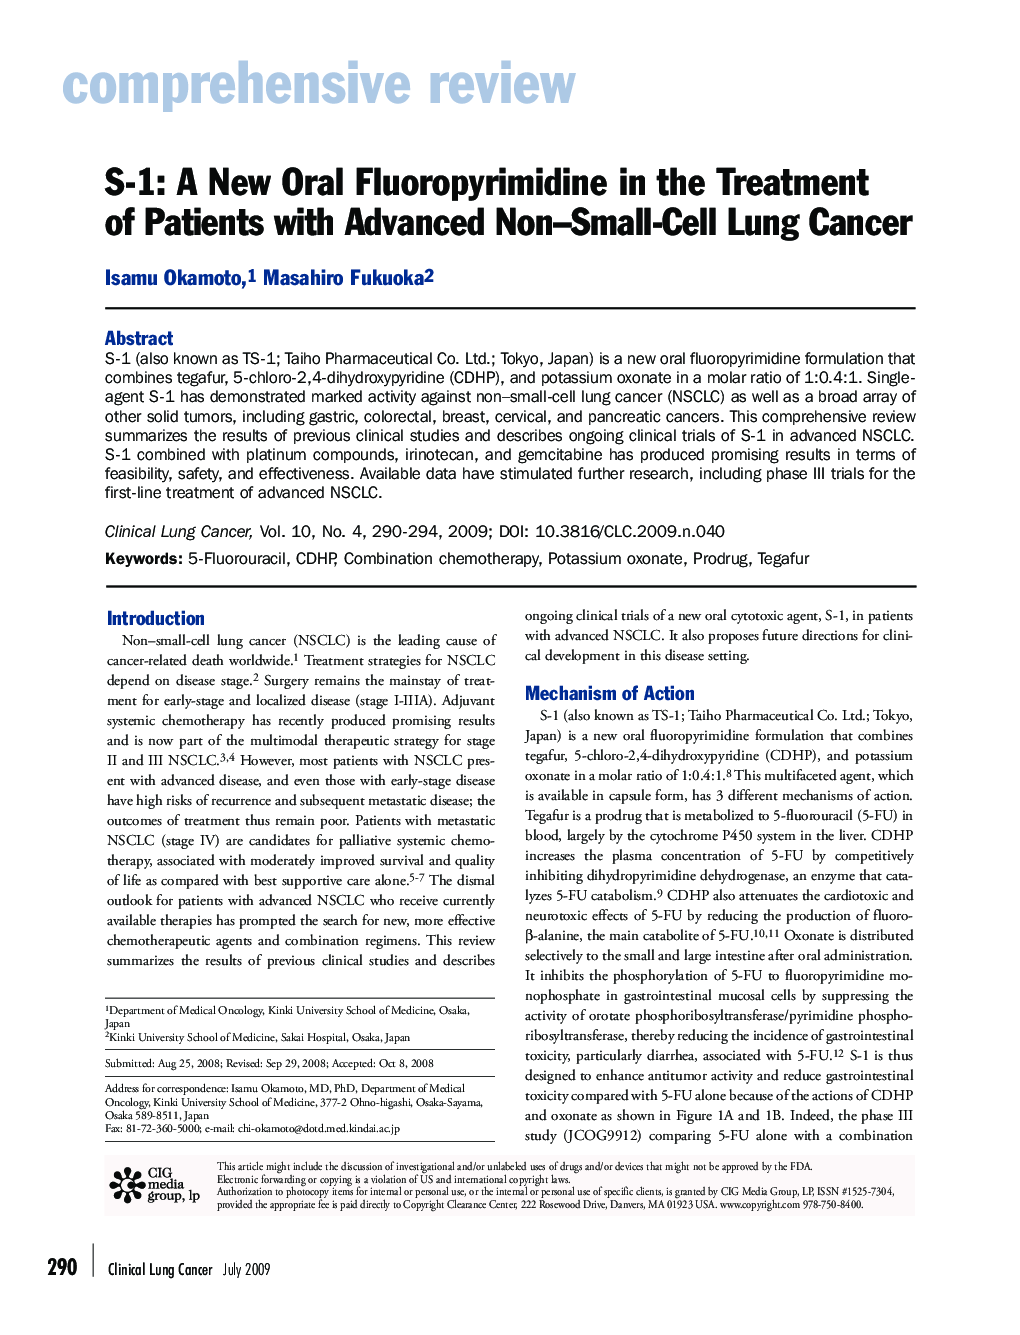 S-1: A New Oral Fluoropyrimidine in the Treatment of Patients with Advanced Non–Small-Cell Lung Cancer 